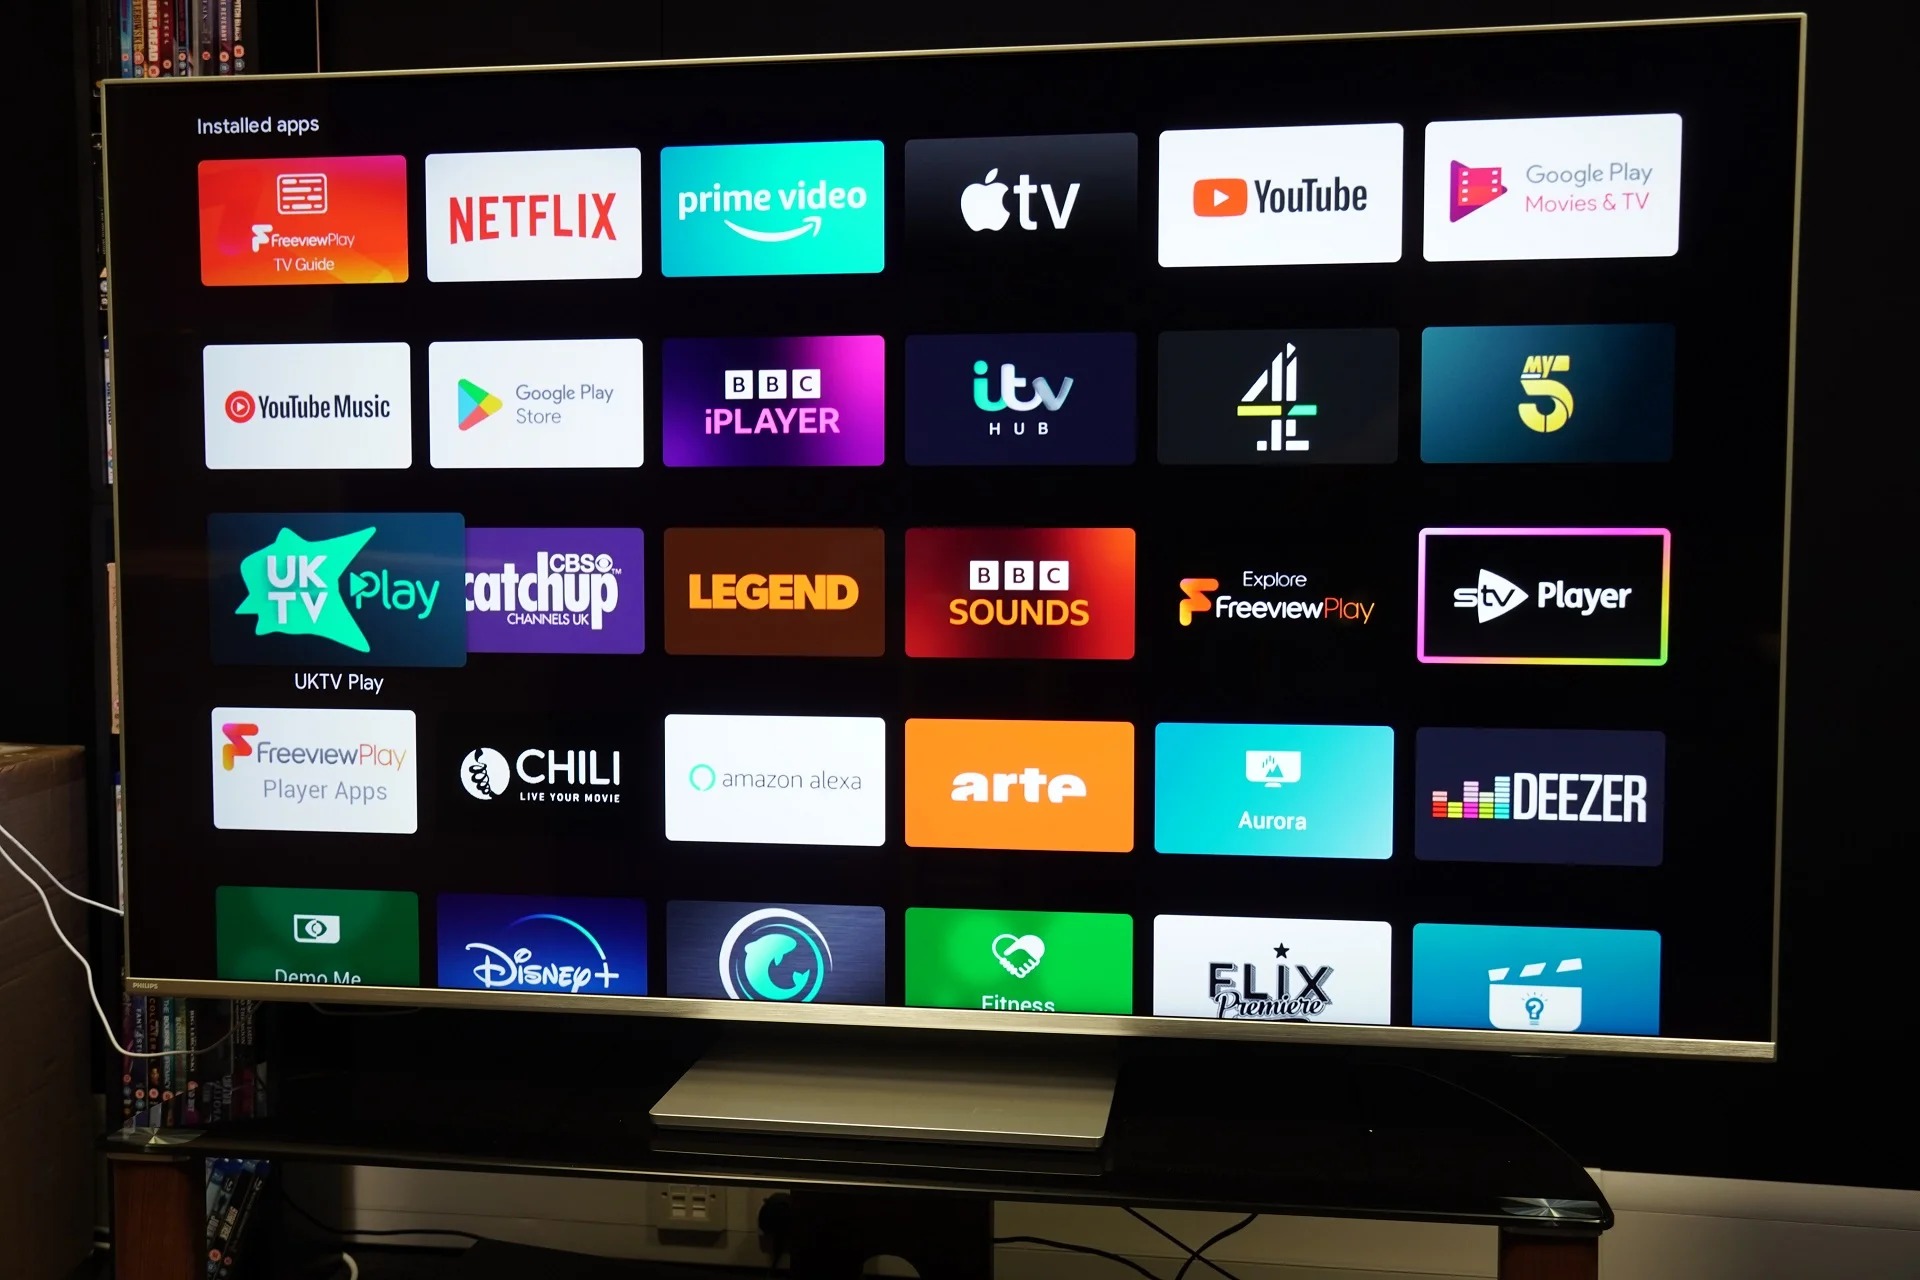 How To Connect Philips Smart TV To Amazon Echo